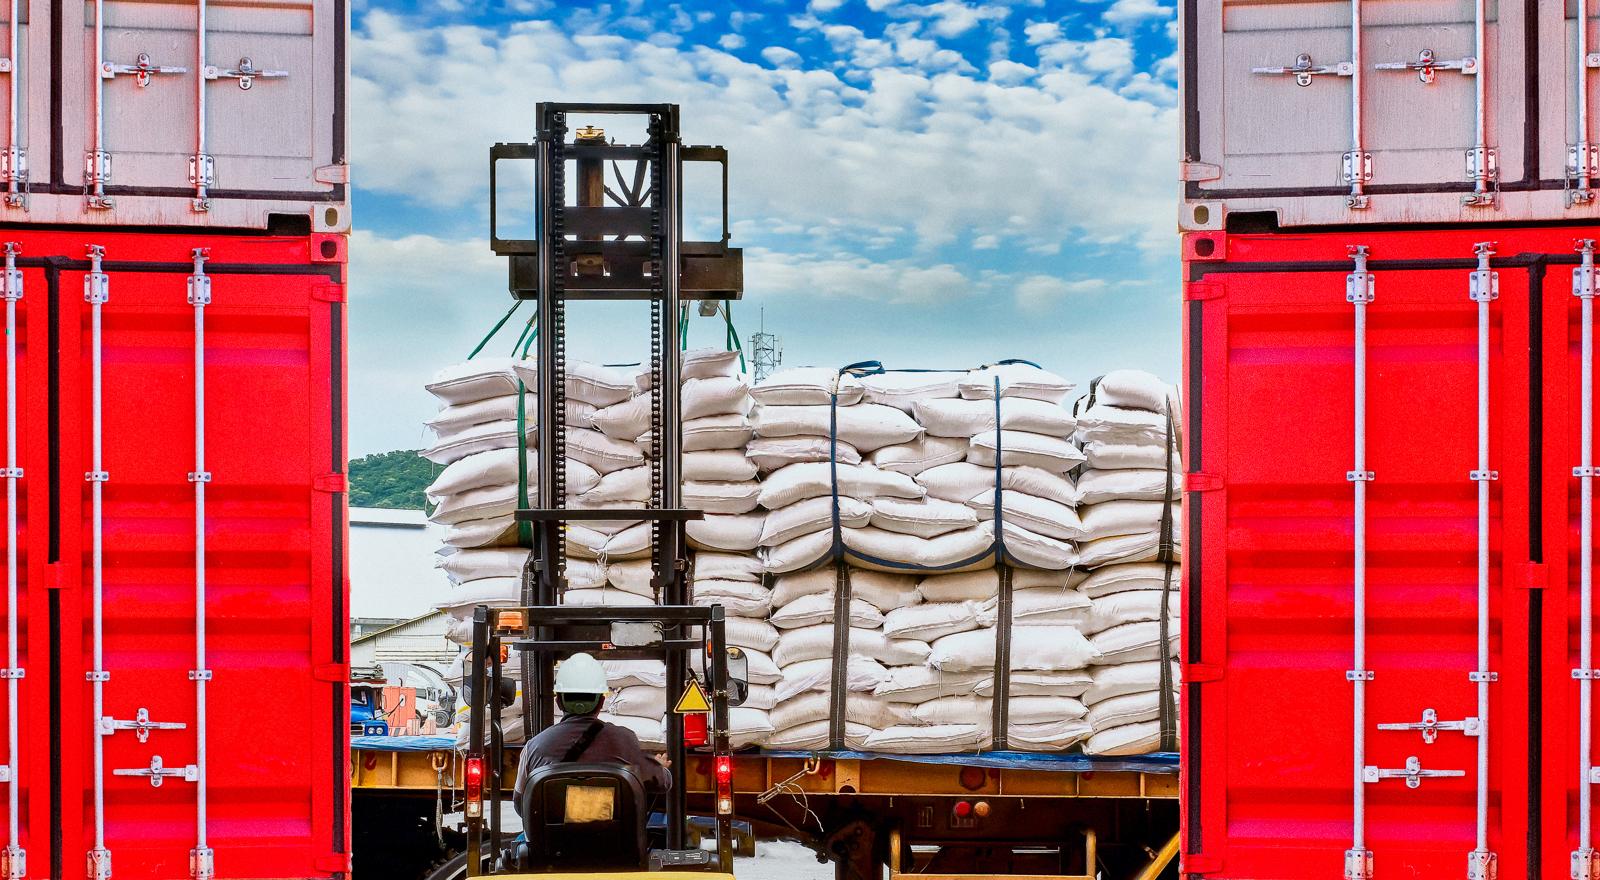 A forklift operator lifts white sugar bags onto a truck from containers